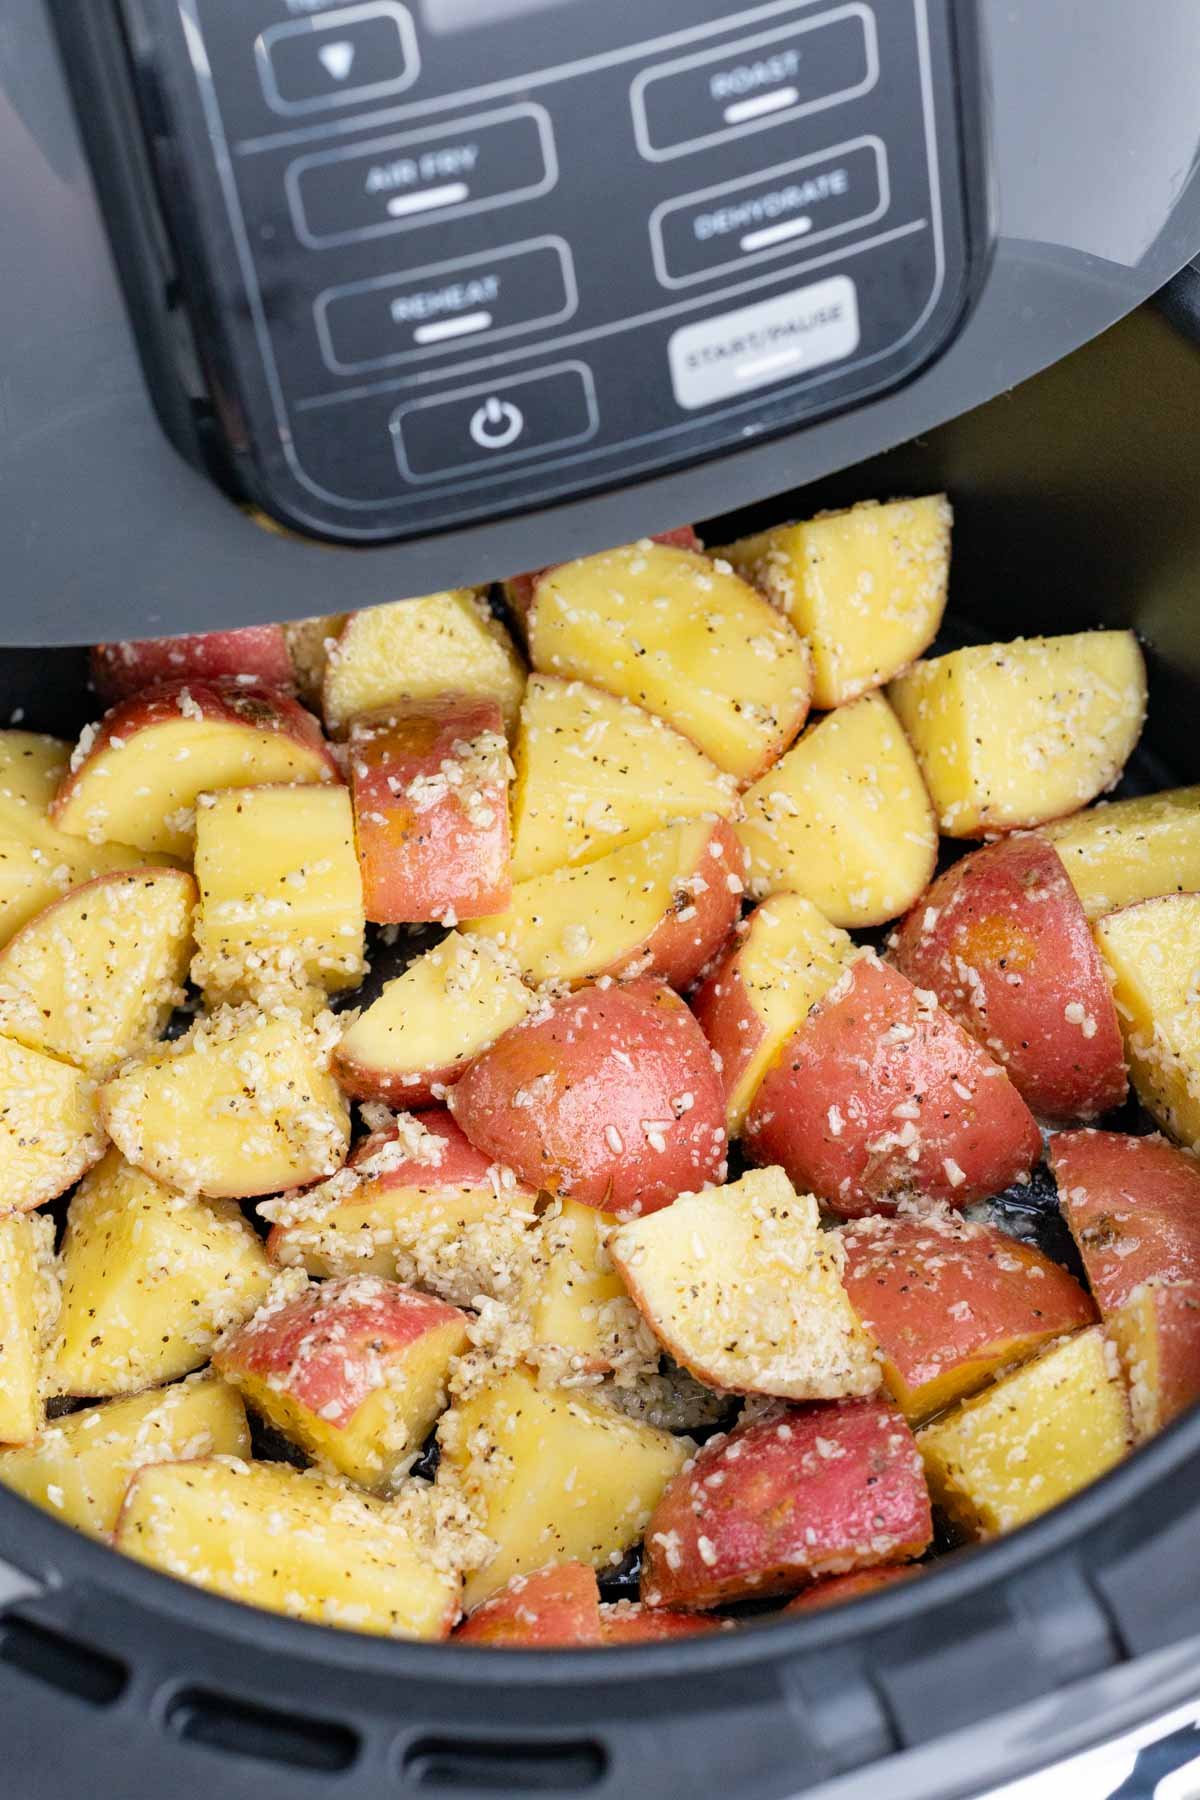 Seasoned potatoes with Parmesan are added to an air fryer.